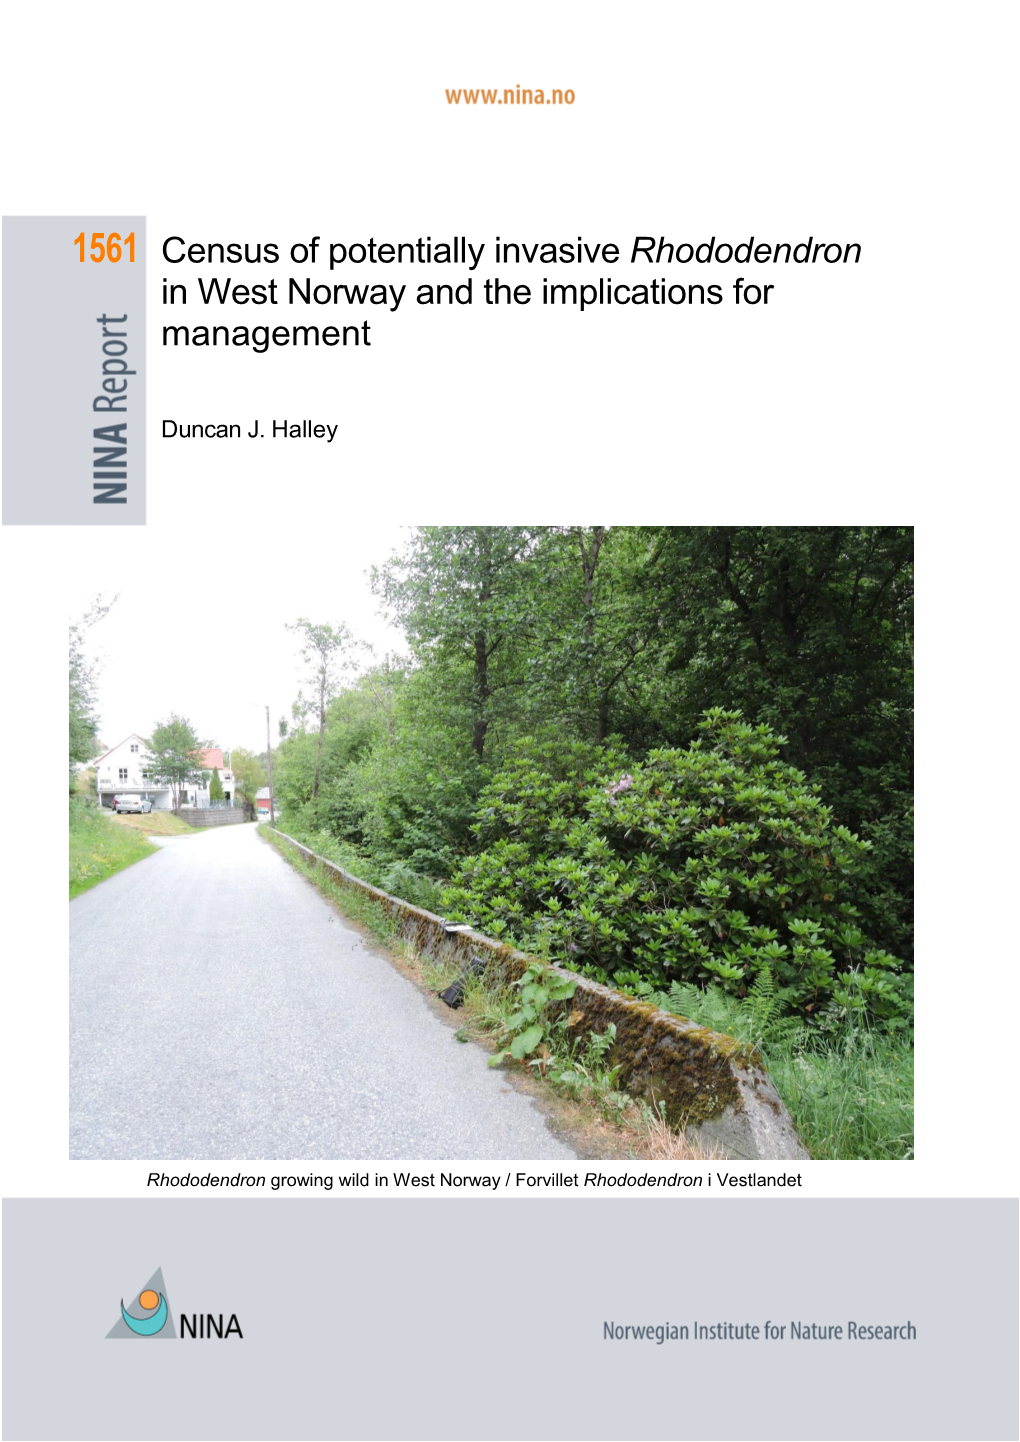 Census of Potentially Invasive Rhododendron in West Norway and the Implications for Management